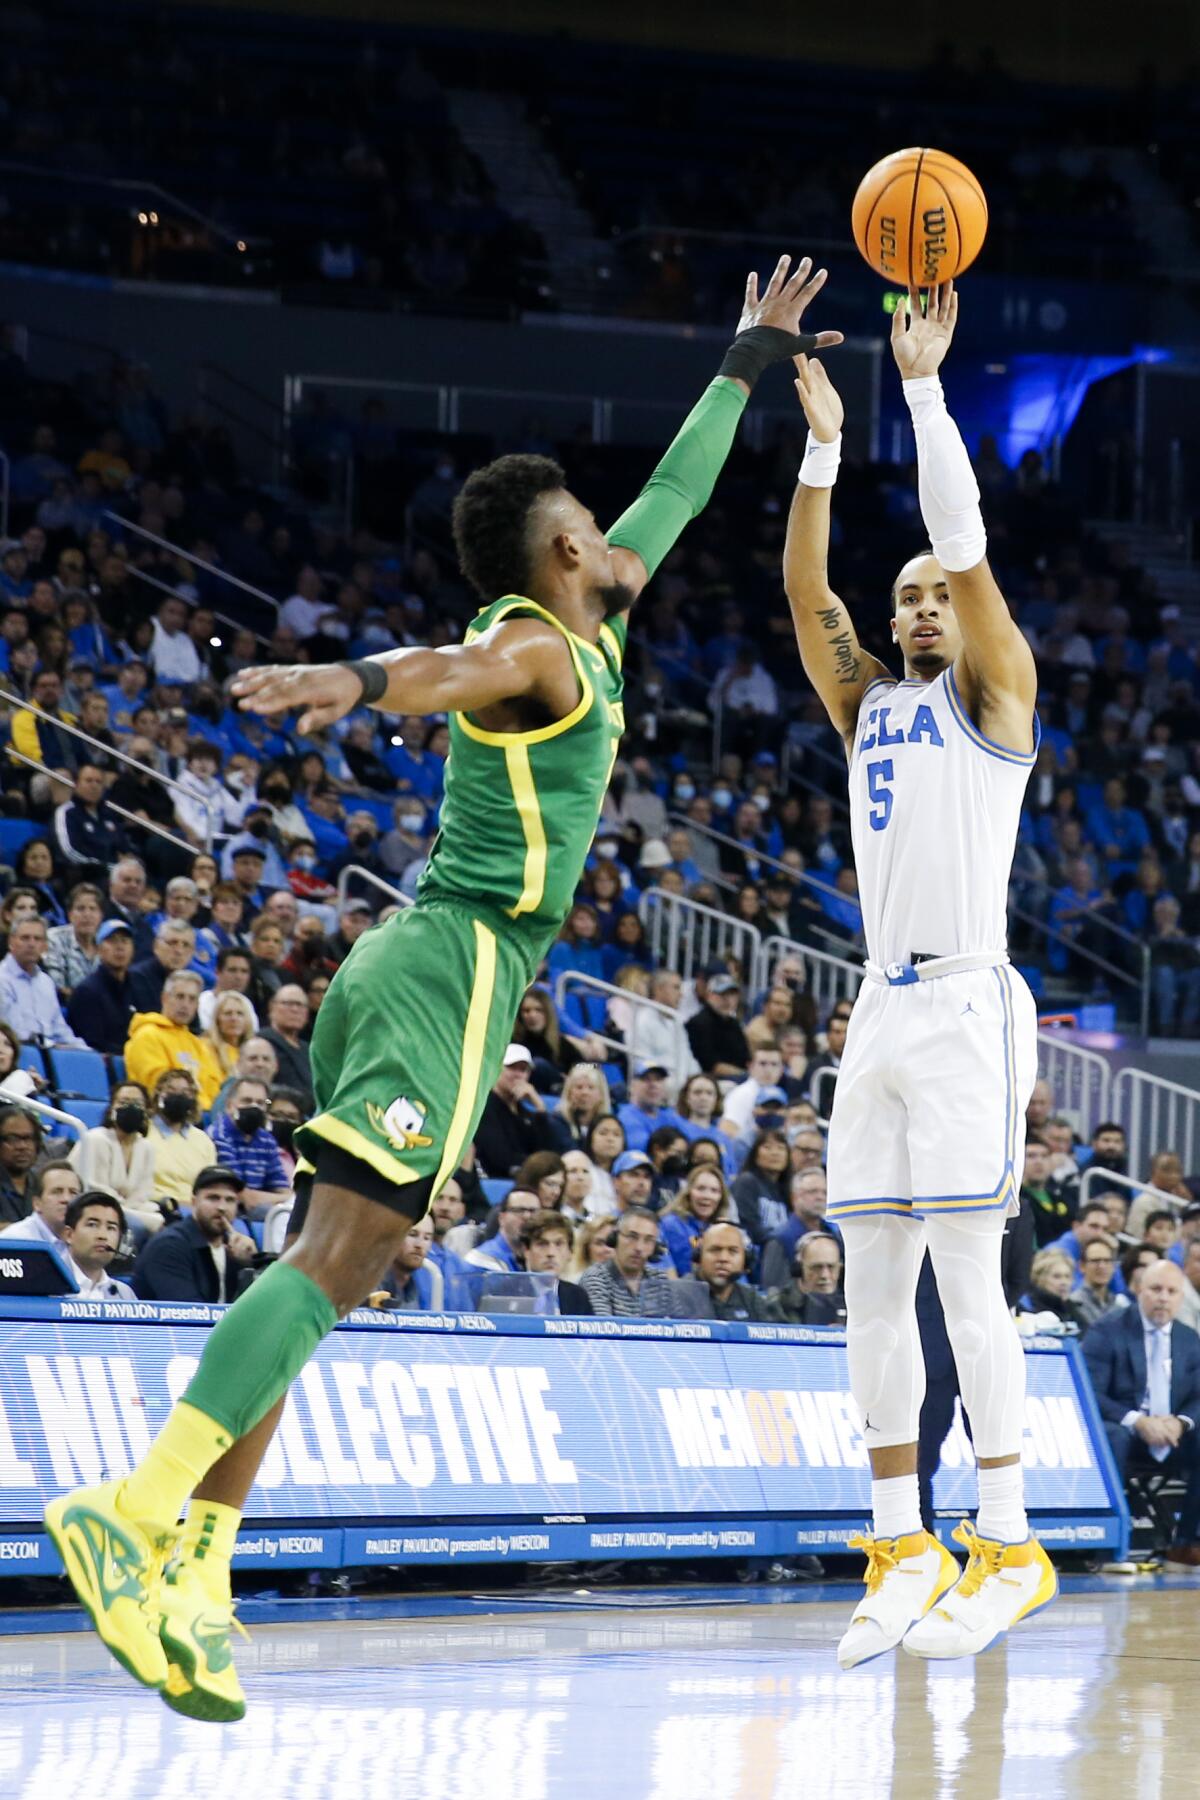 Bruins guard Amari Bailey releases a three-point shot while defended by Ducks forward Quincy Guerrier.